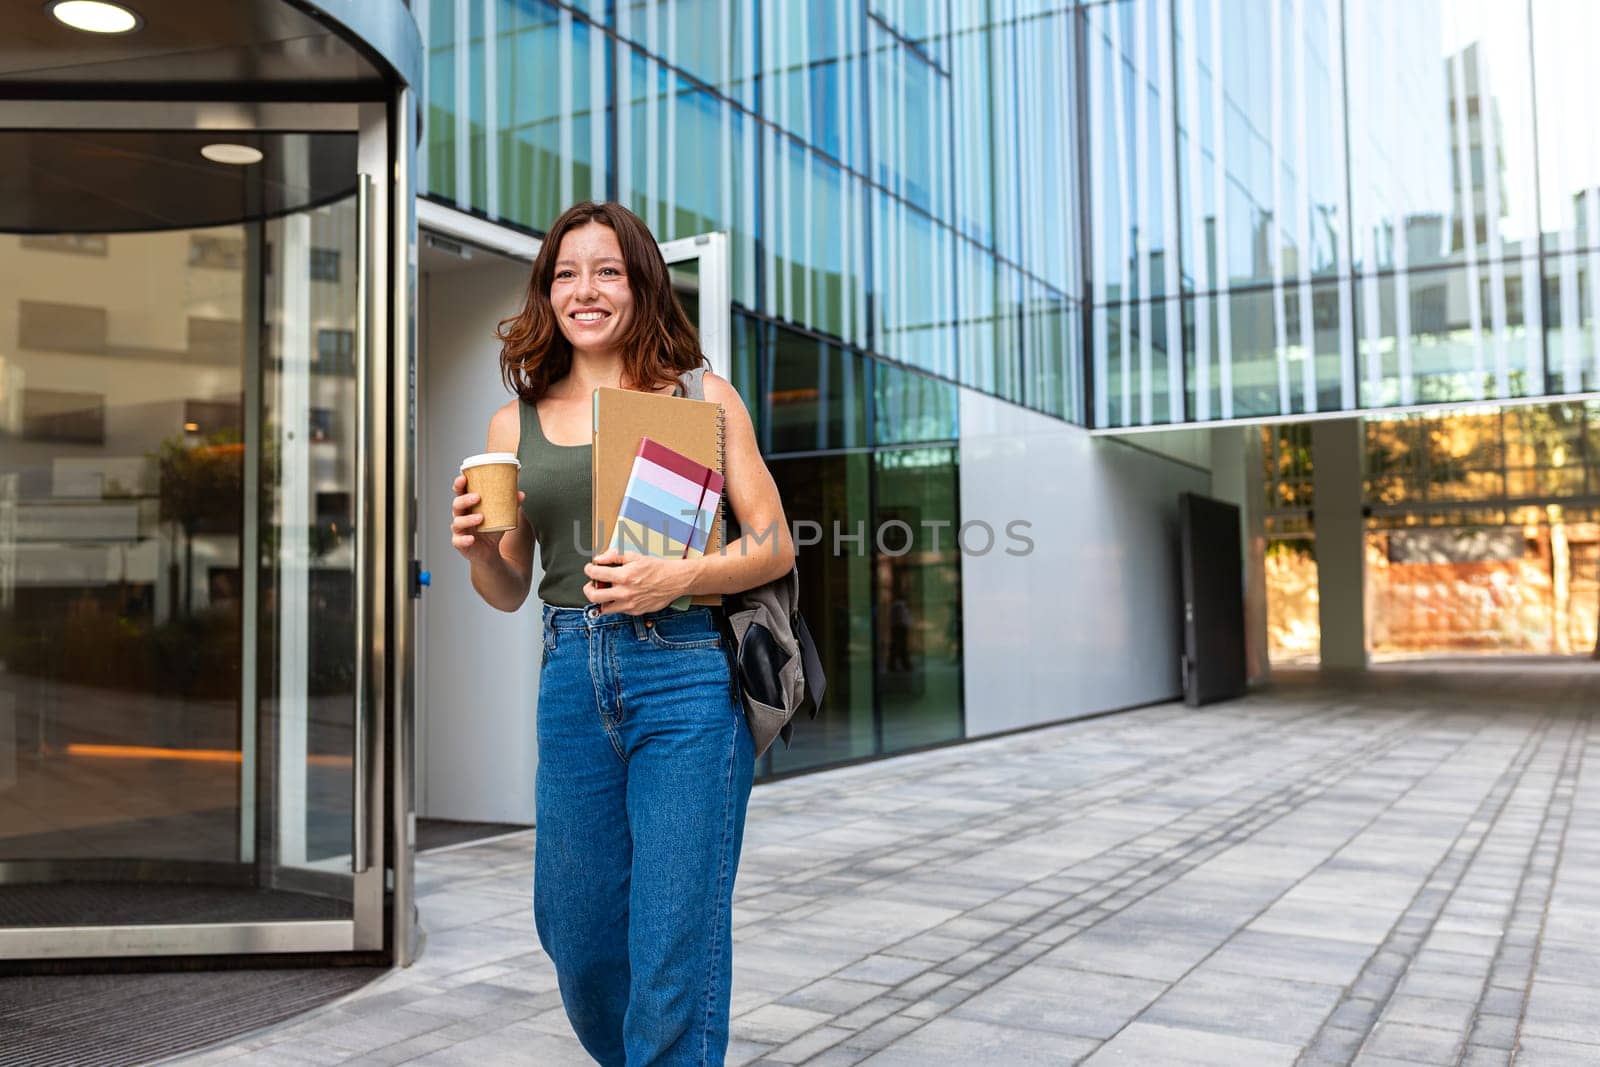 Female university student with backpack walking to class in college campus holding coffee and notebooks. Copy space. by Hoverstock